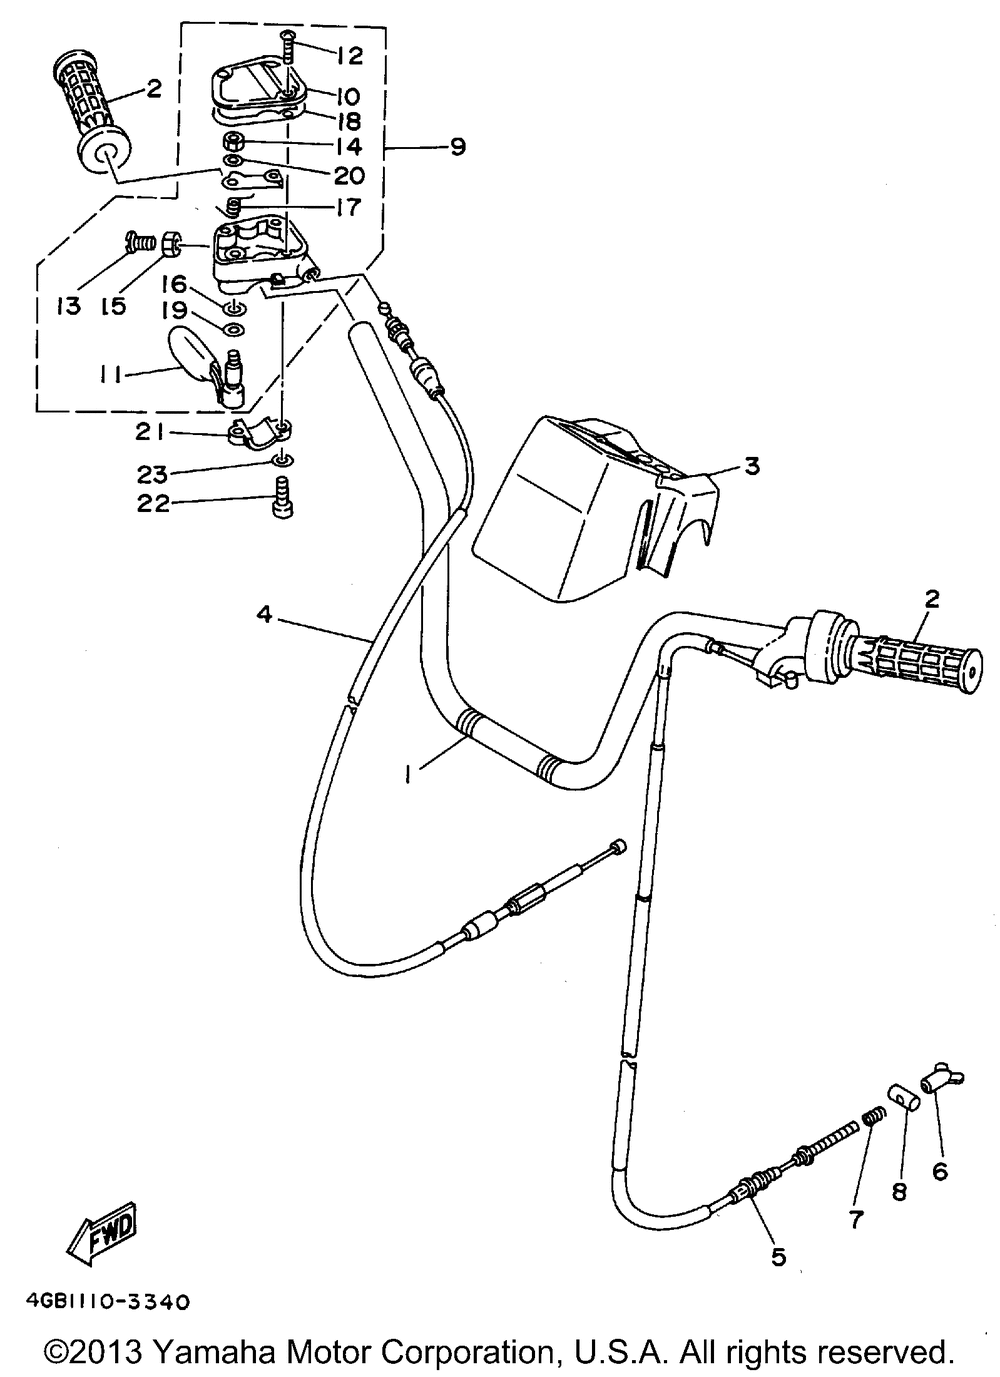 Steering handle - cable